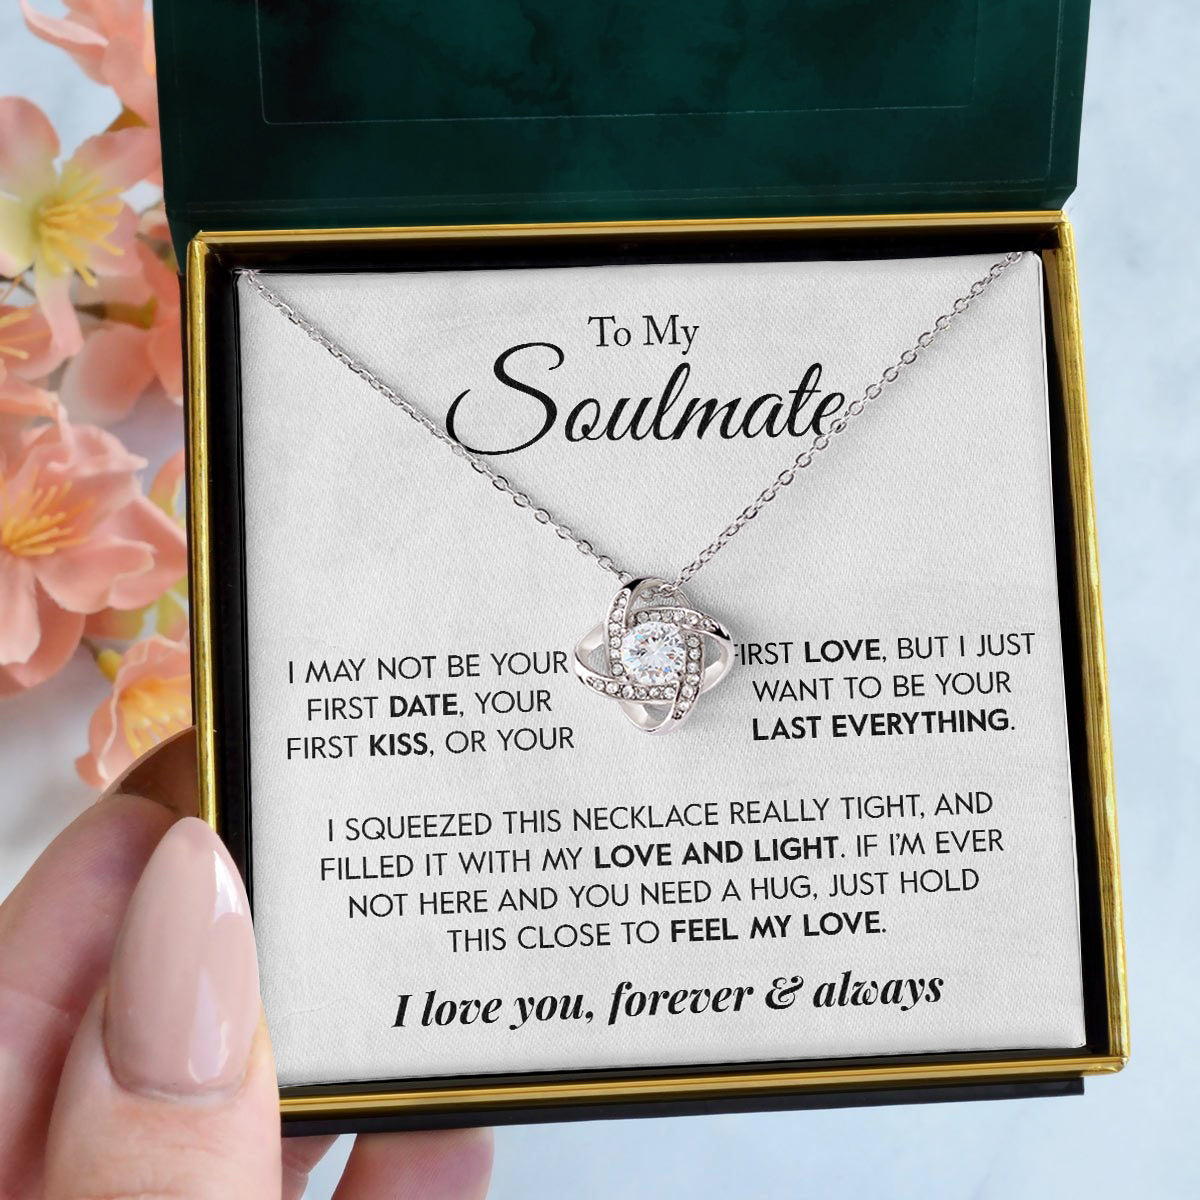 To My Soulmate | "Last Everything" | Love Knot Necklace